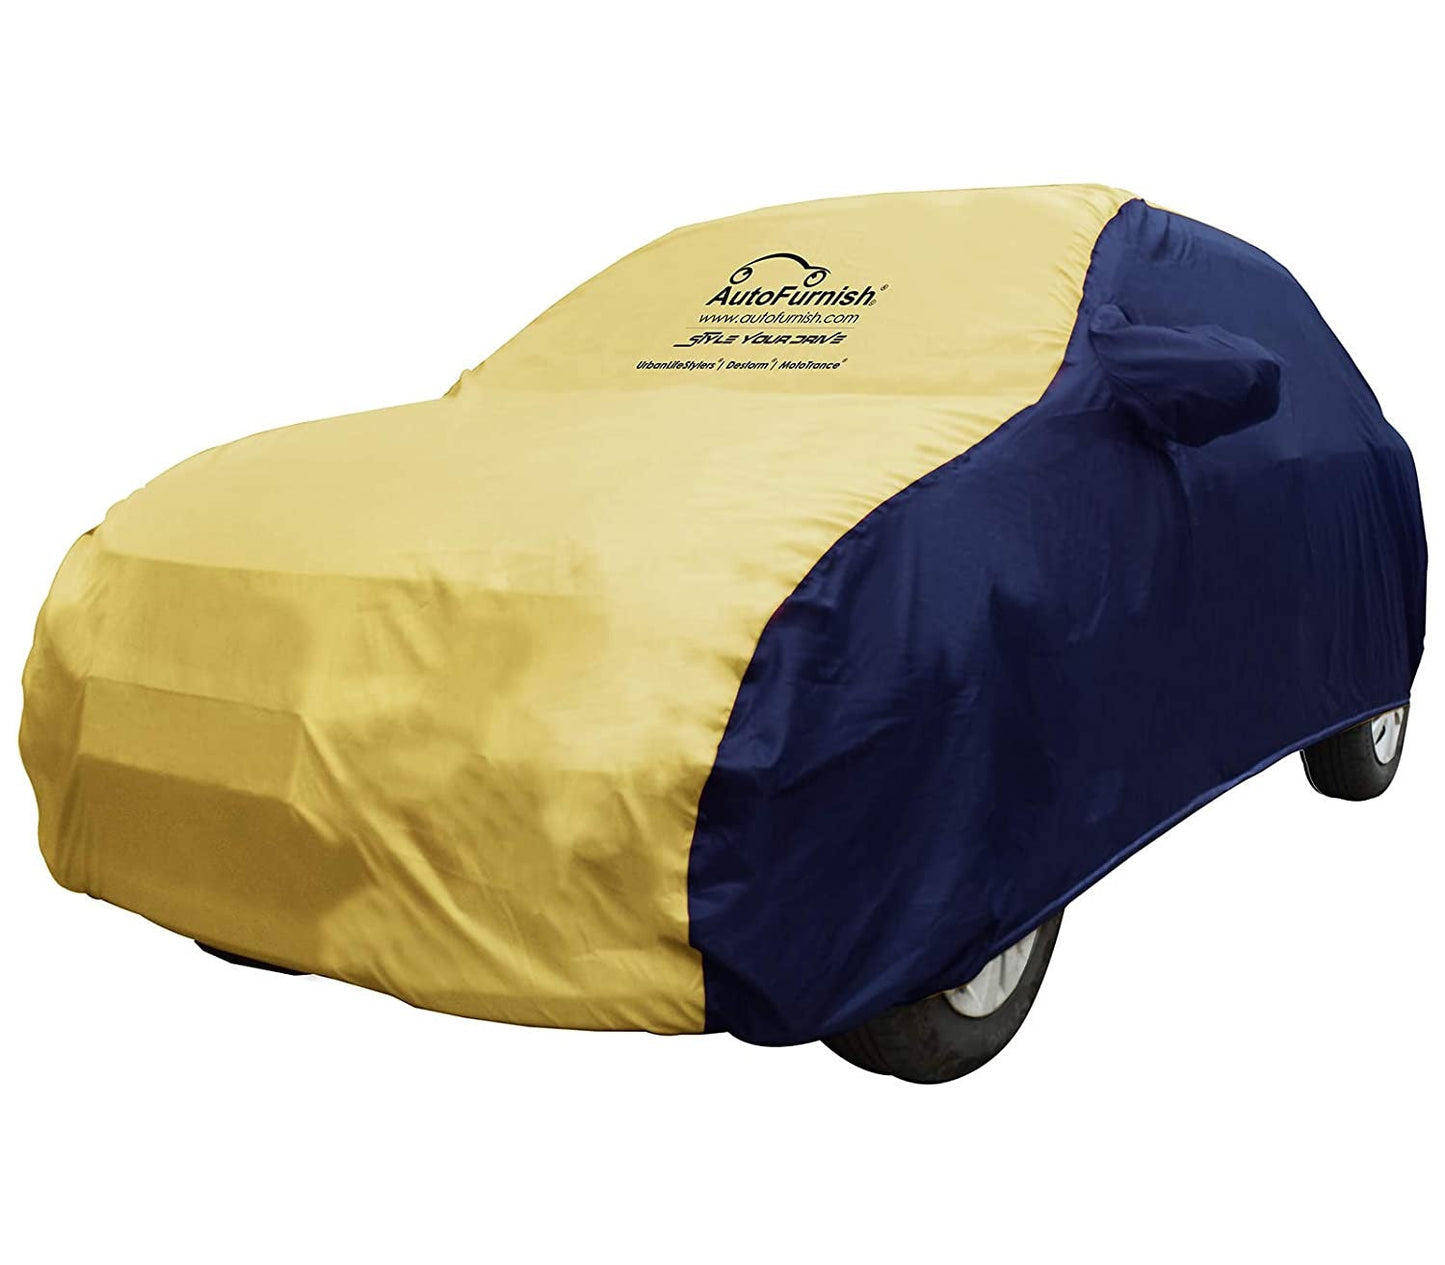 BMW X3 xDrive (2019) Car Body Cover, Triple Stitched, Heat & Water Resistant with Side Mirror Pockets (SPORTY Series)